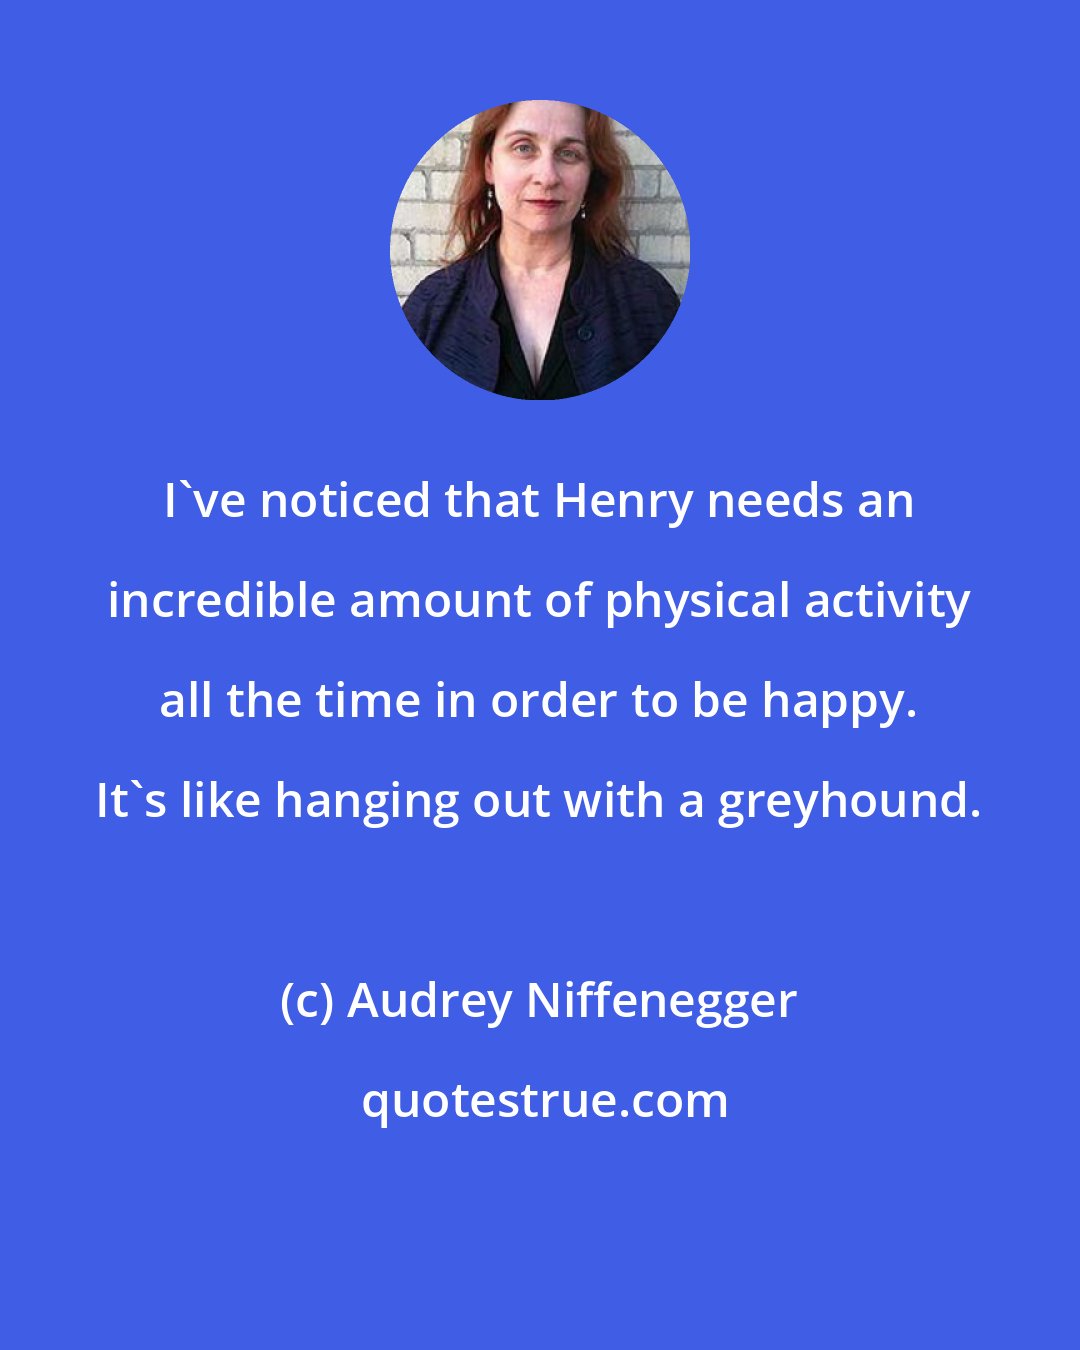 Audrey Niffenegger: I've noticed that Henry needs an incredible amount of physical activity all the time in order to be happy. It's like hanging out with a greyhound.